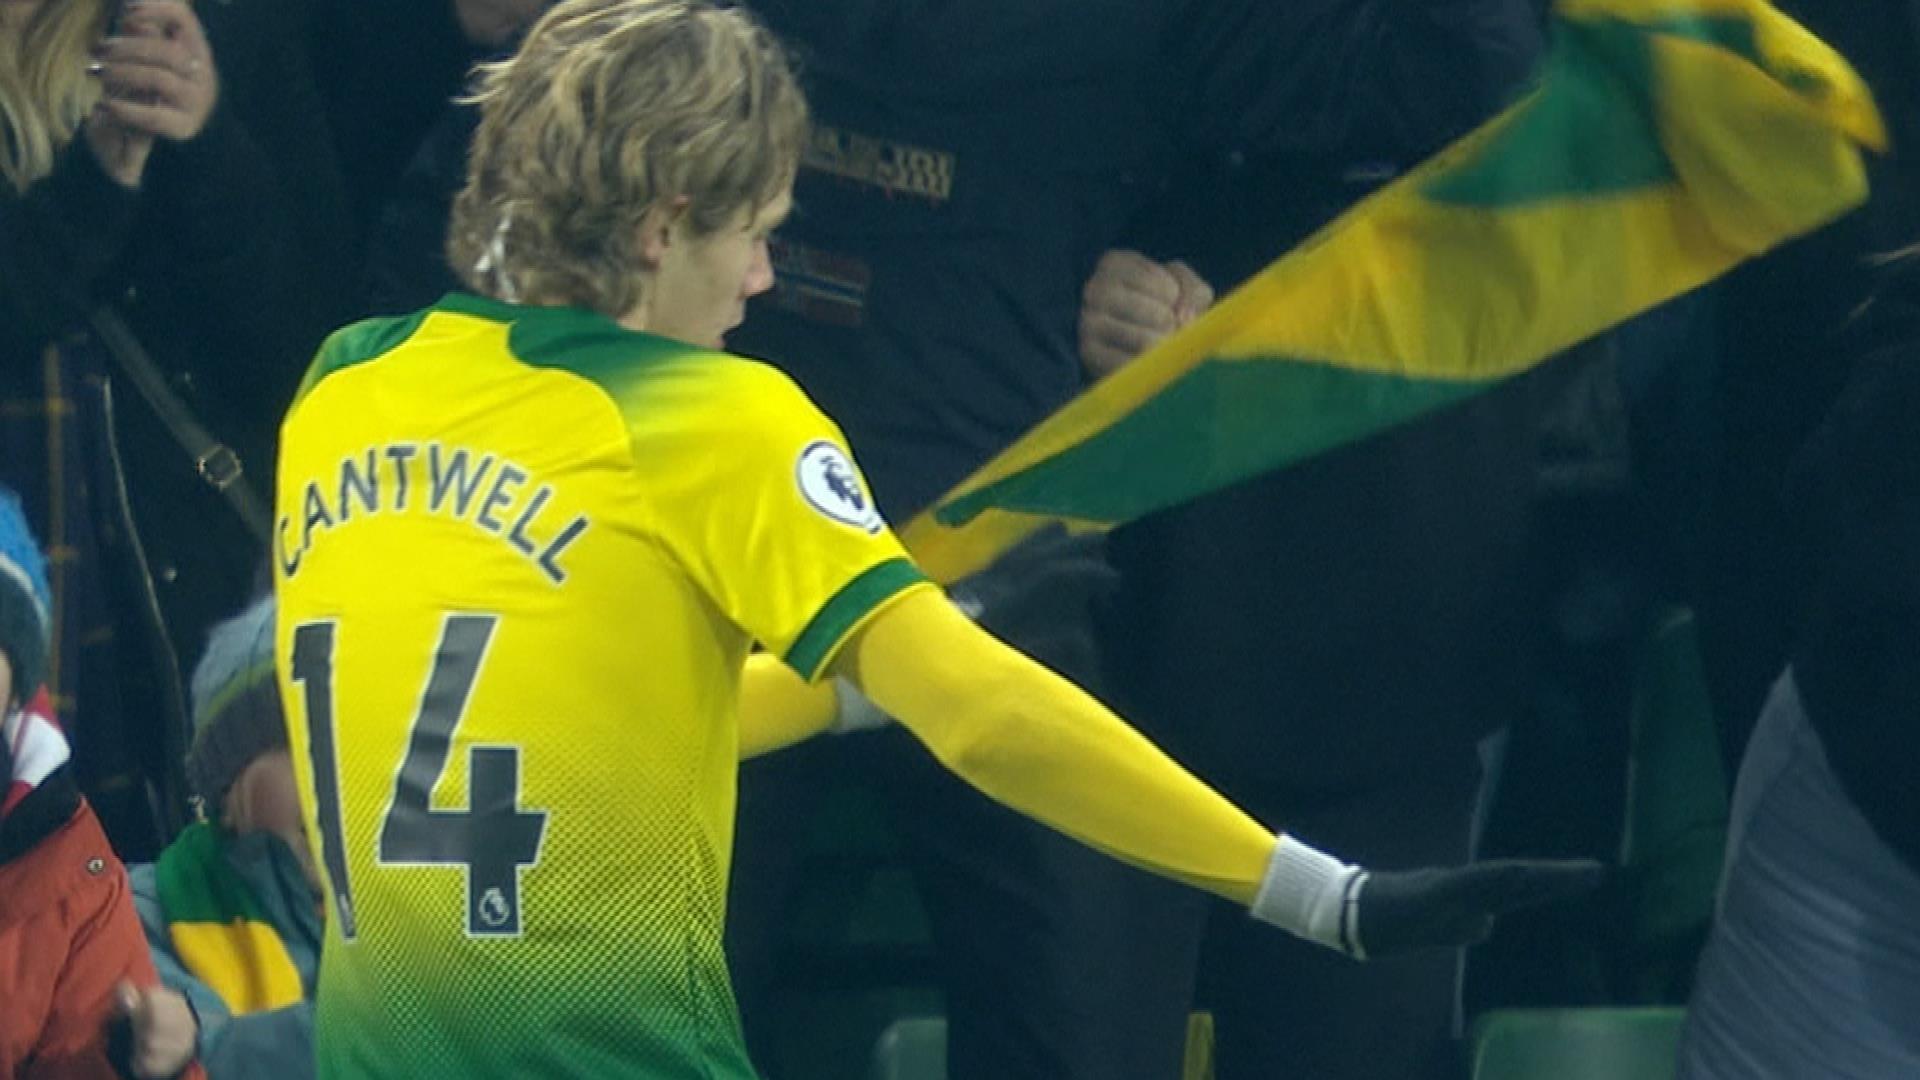 Cantwell slots Norwich City into the lead